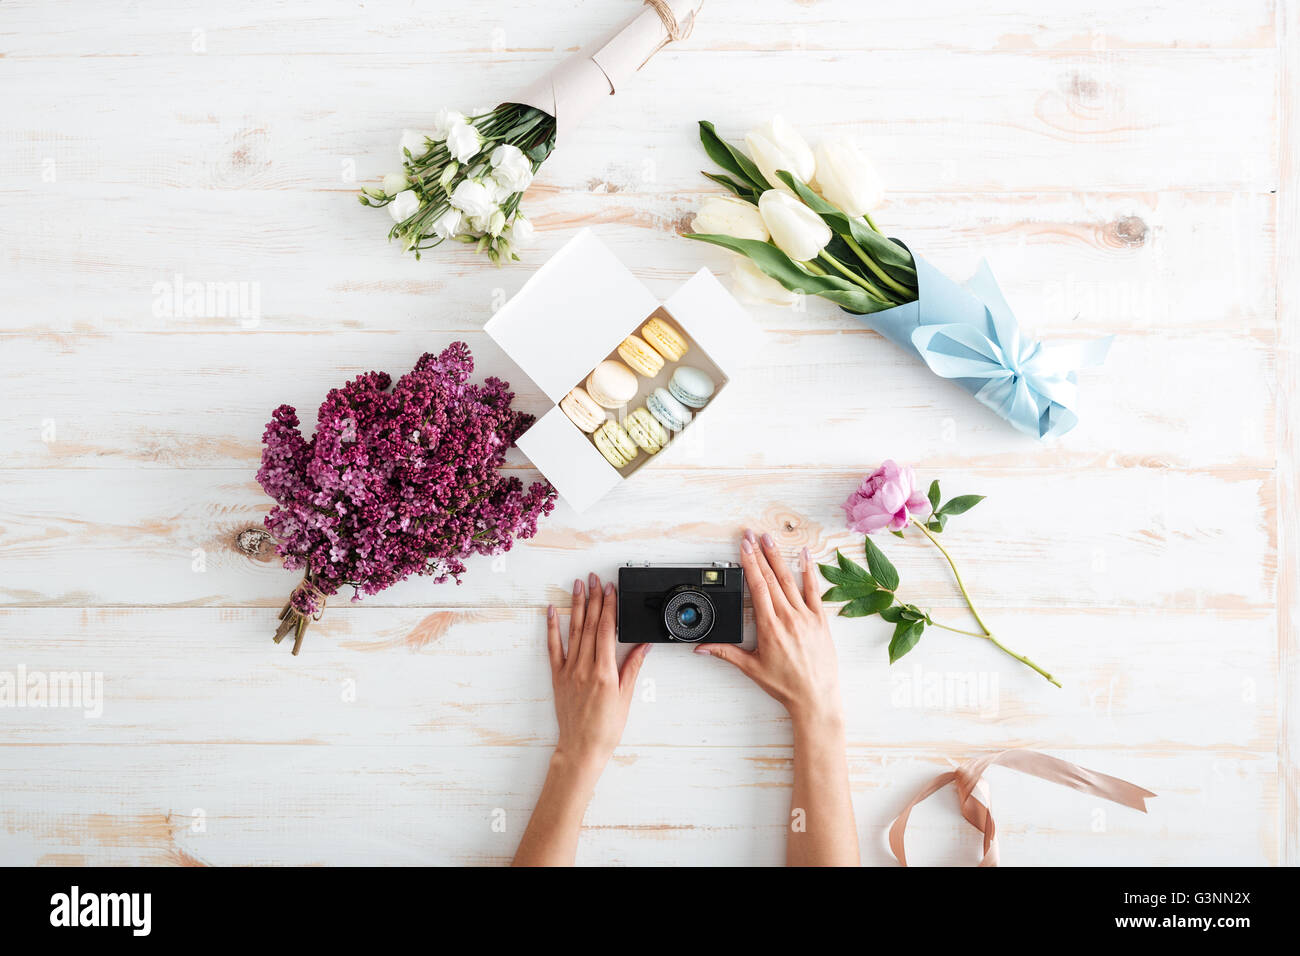 Hands of young woman holding photo camera on wooden table with french macaroons and flowers Stock Photo